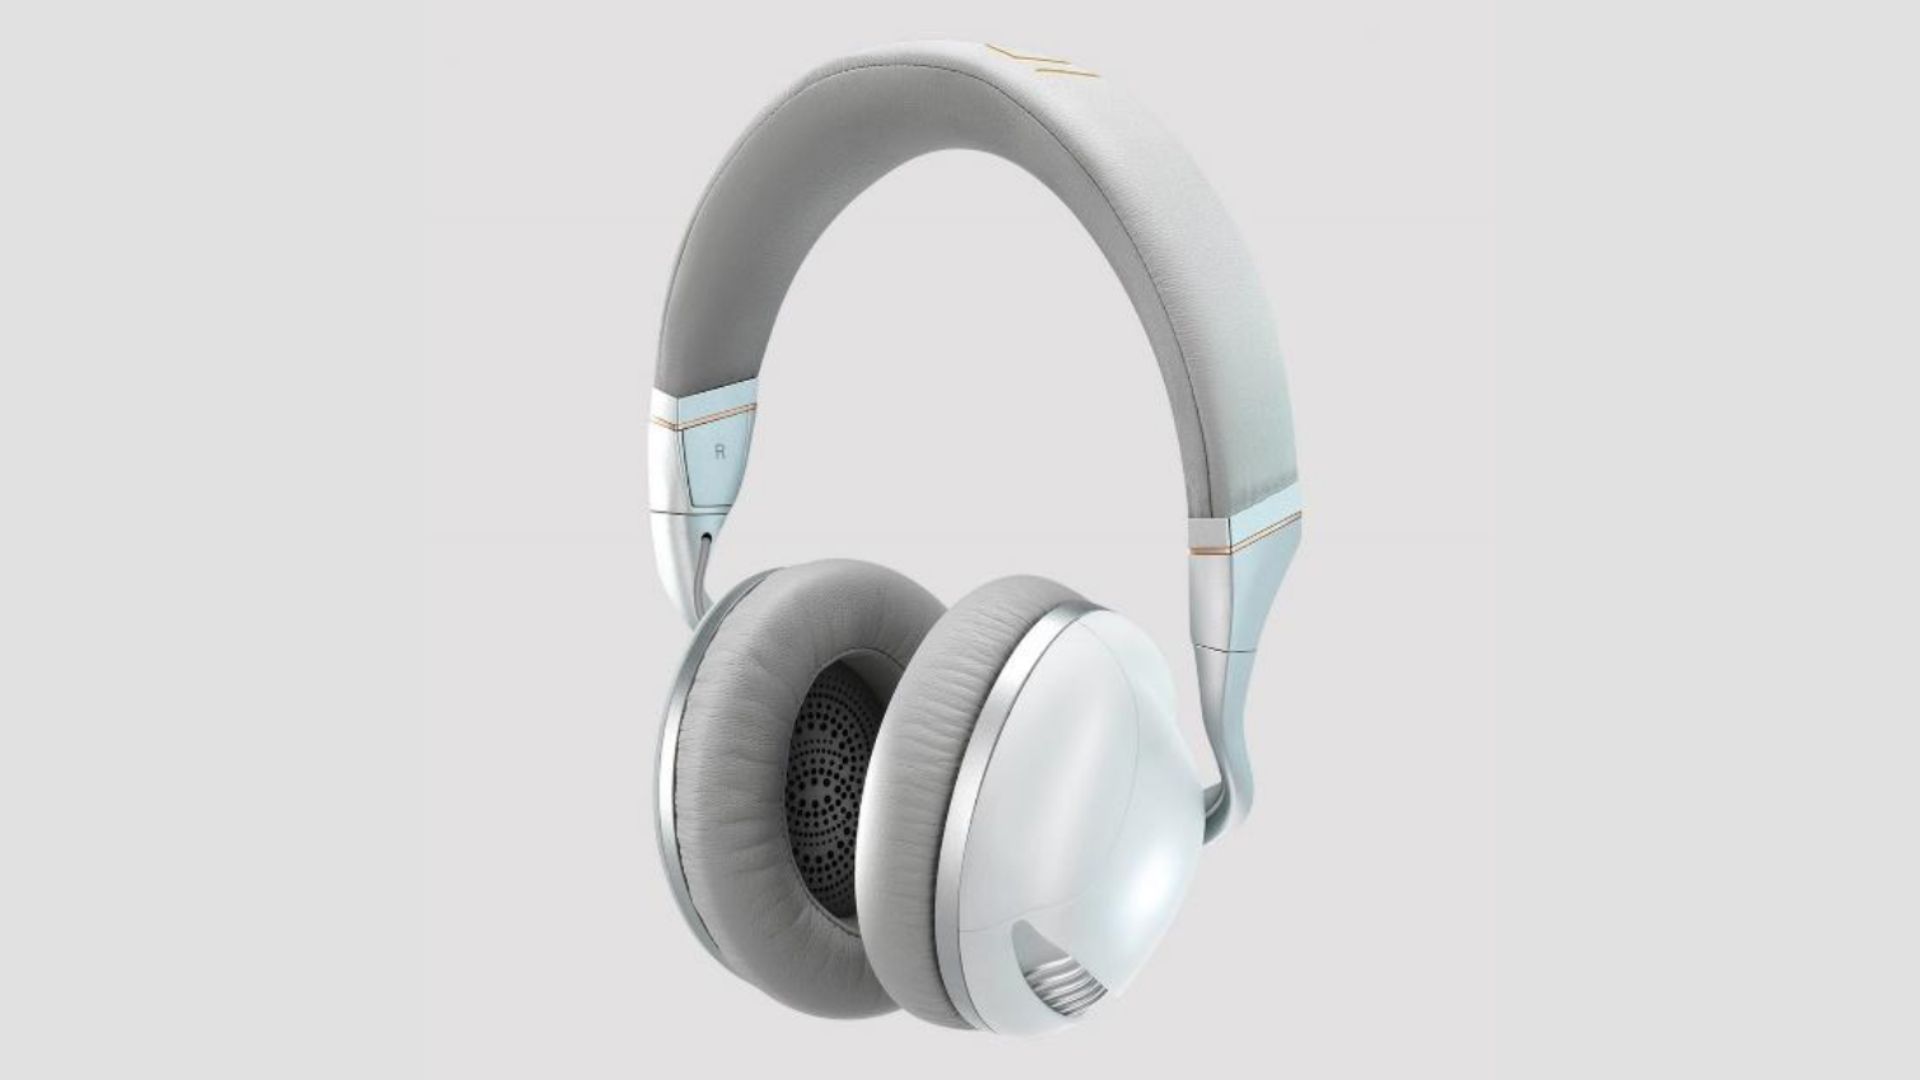 Wireless headphone concepts for the modern age - DesignWanted : DesignWanted